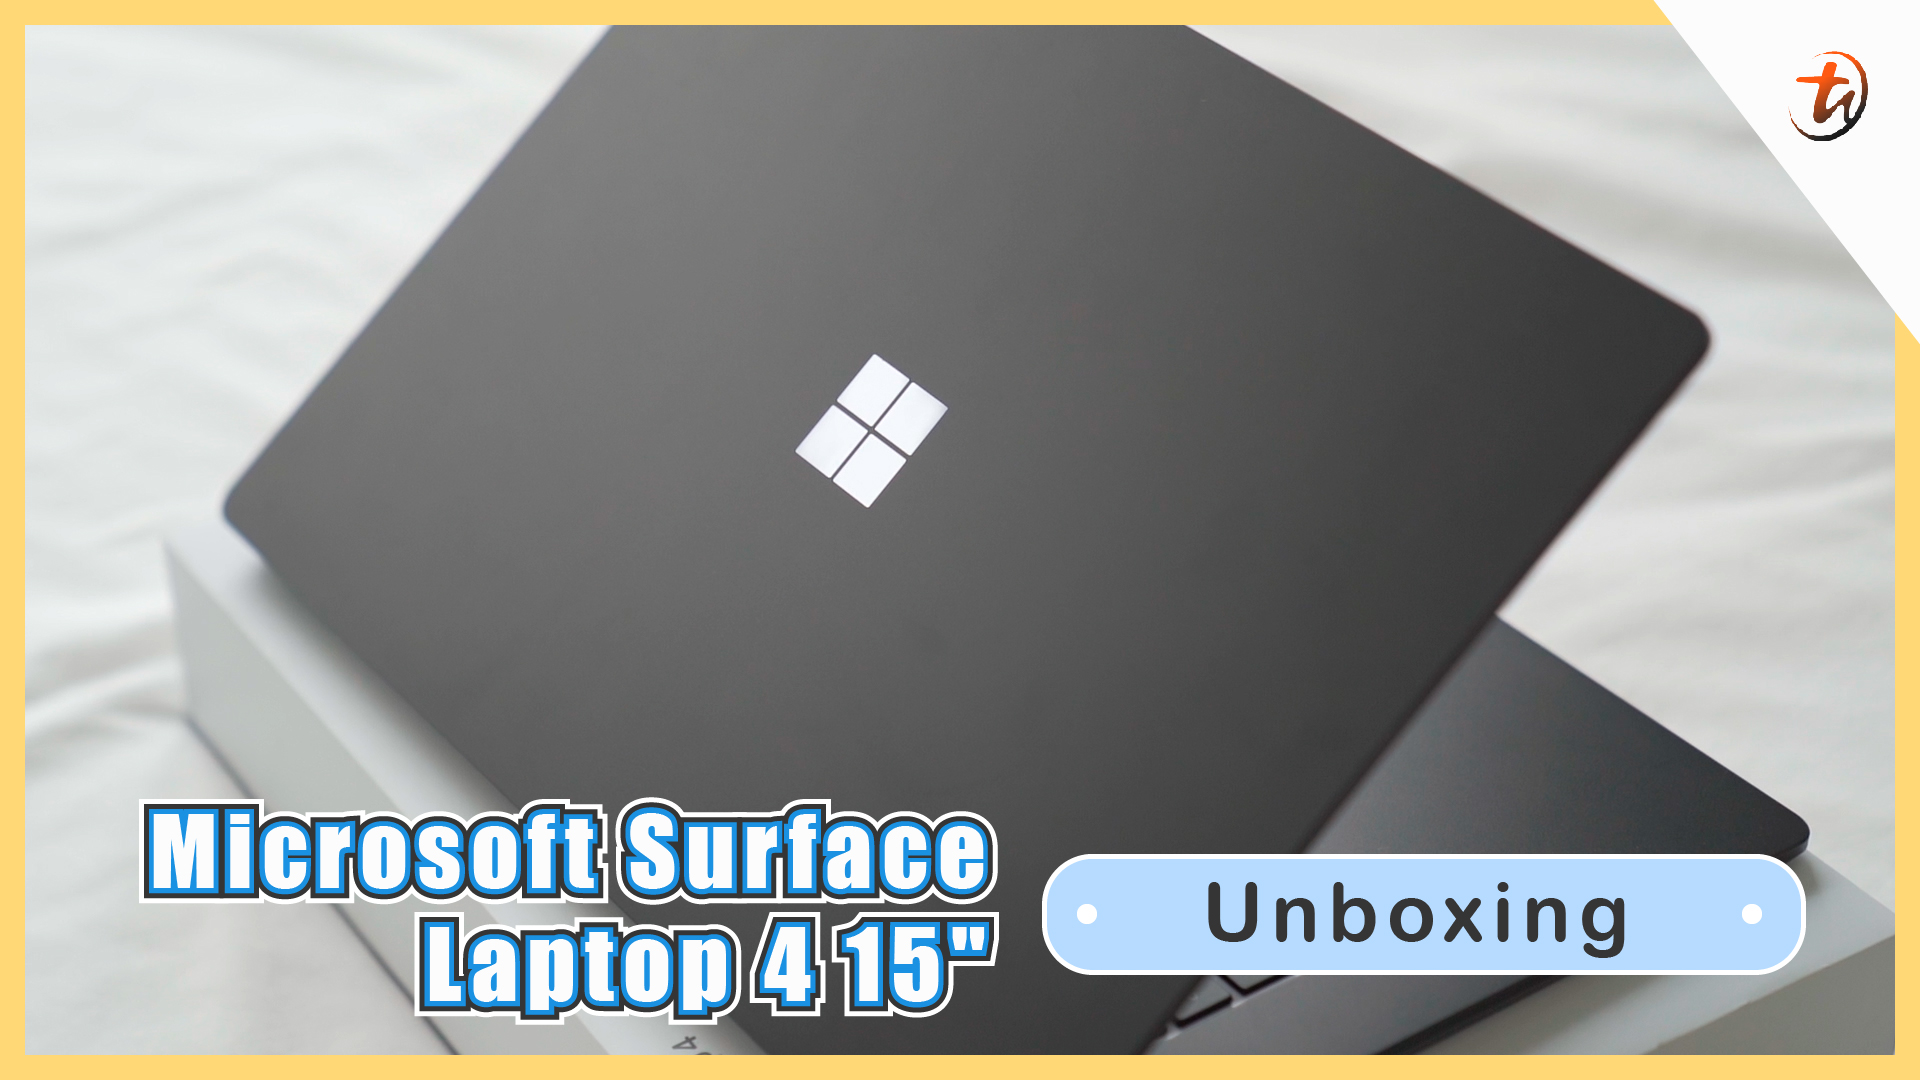 Microsoft Surface Laptop 4 - Ultra-thin design laptop | TechNave Unboxing and Hands-On Video